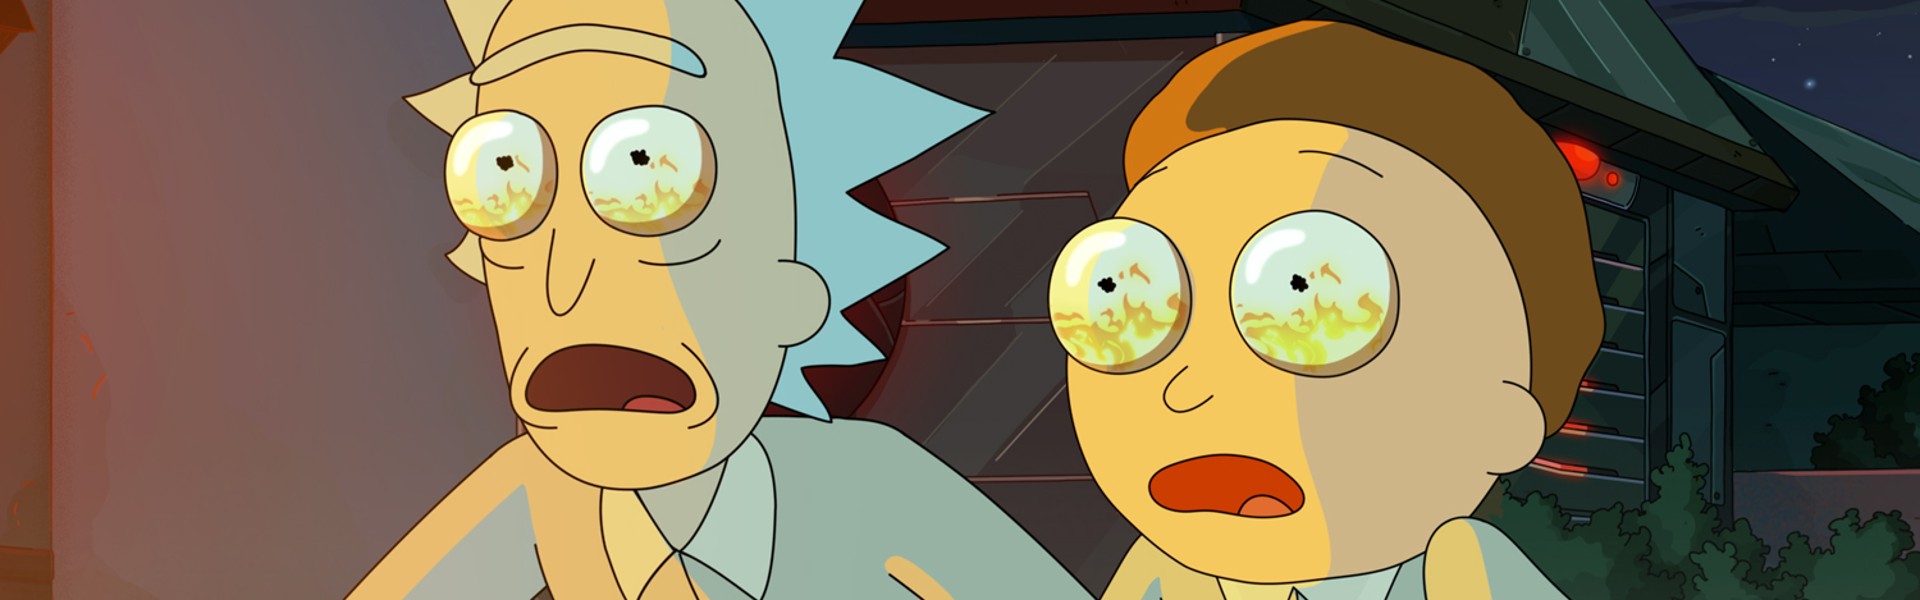 Zack Snyder to direct a “Rick and Morty” movie?